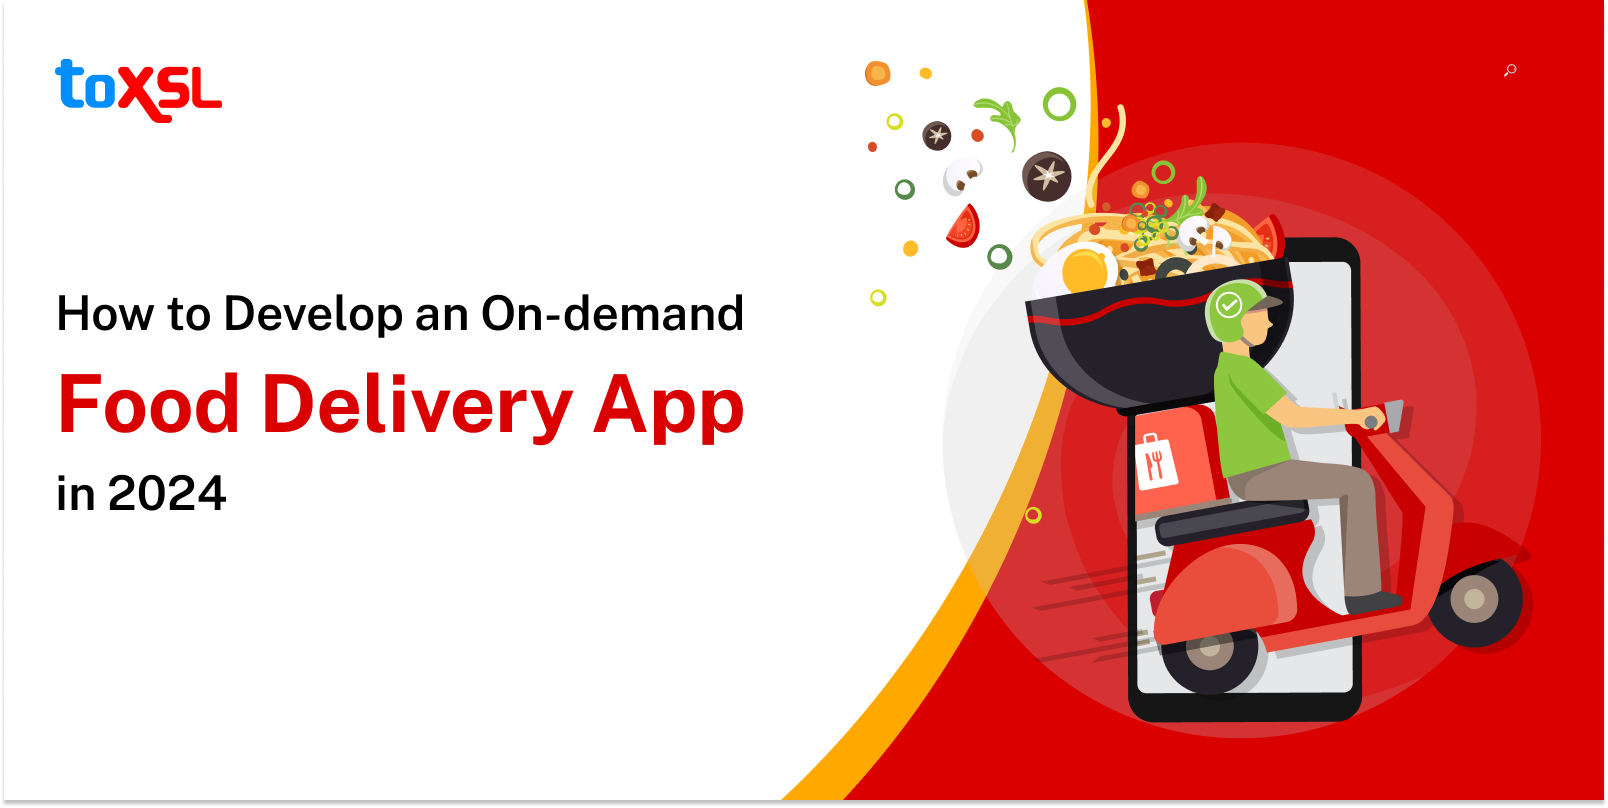 Things You Must Consider While Developing an On-demand Food Delivery App